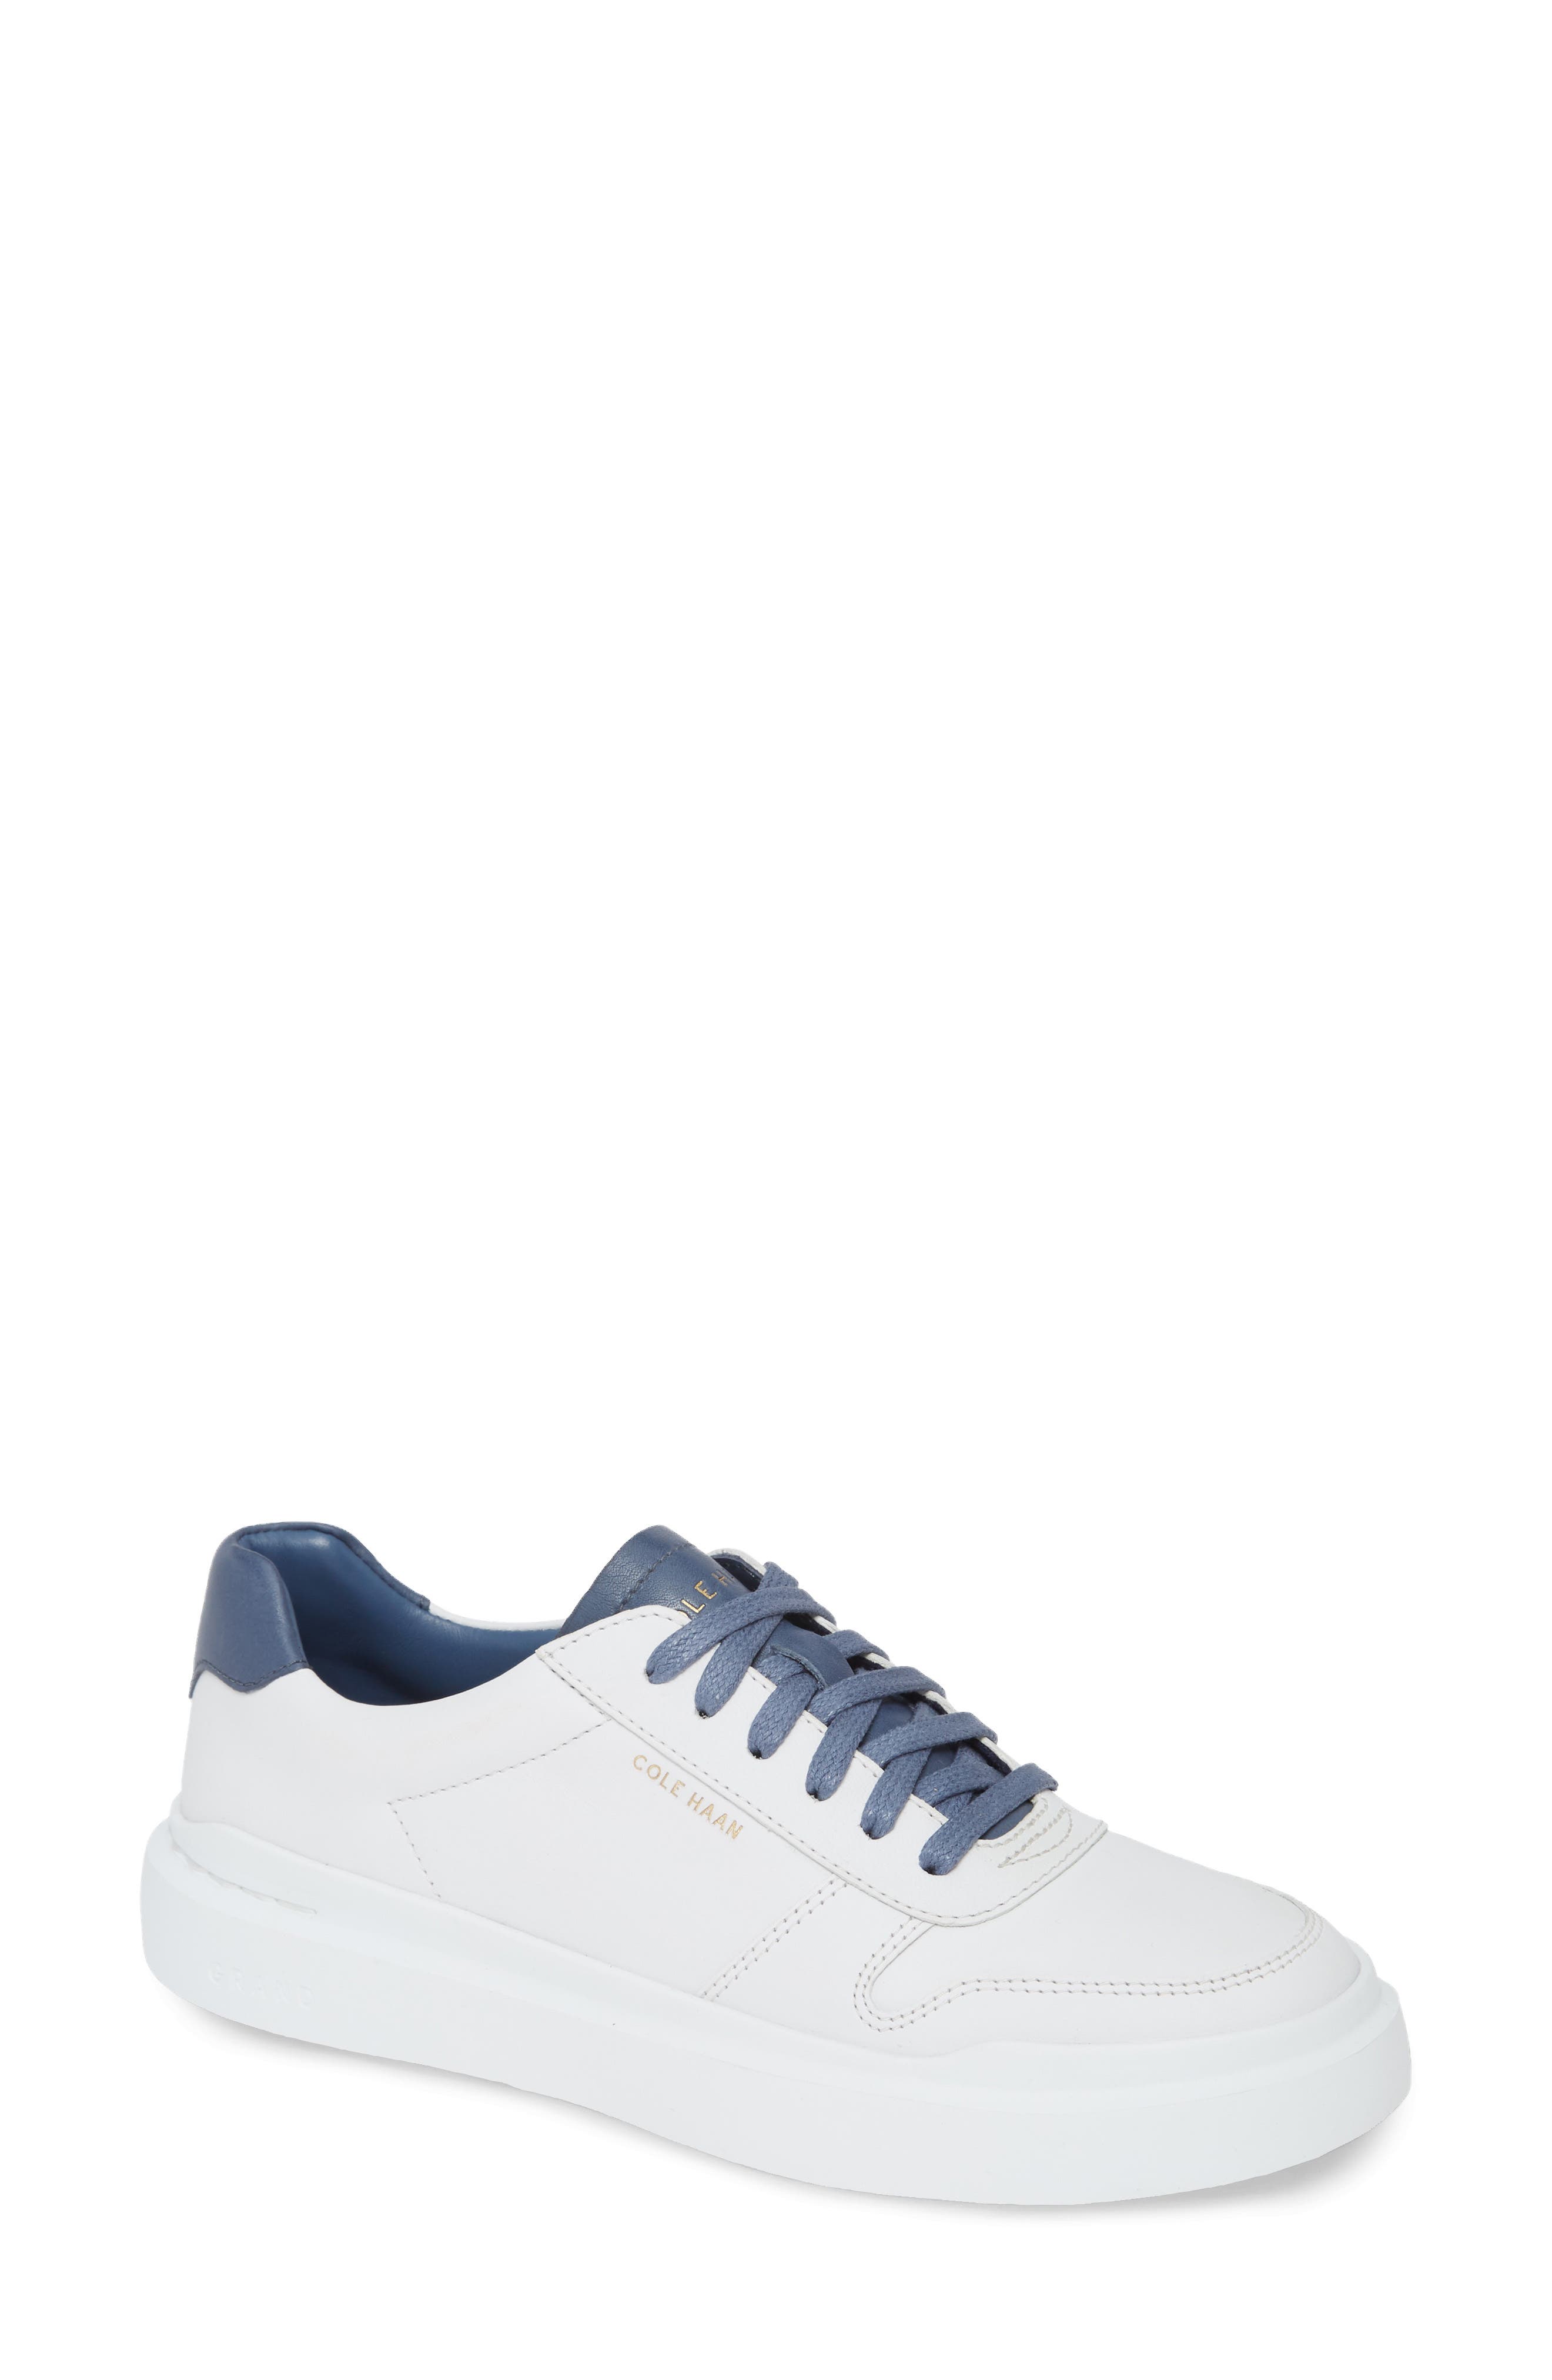 cole haan white sneakers nordstrom